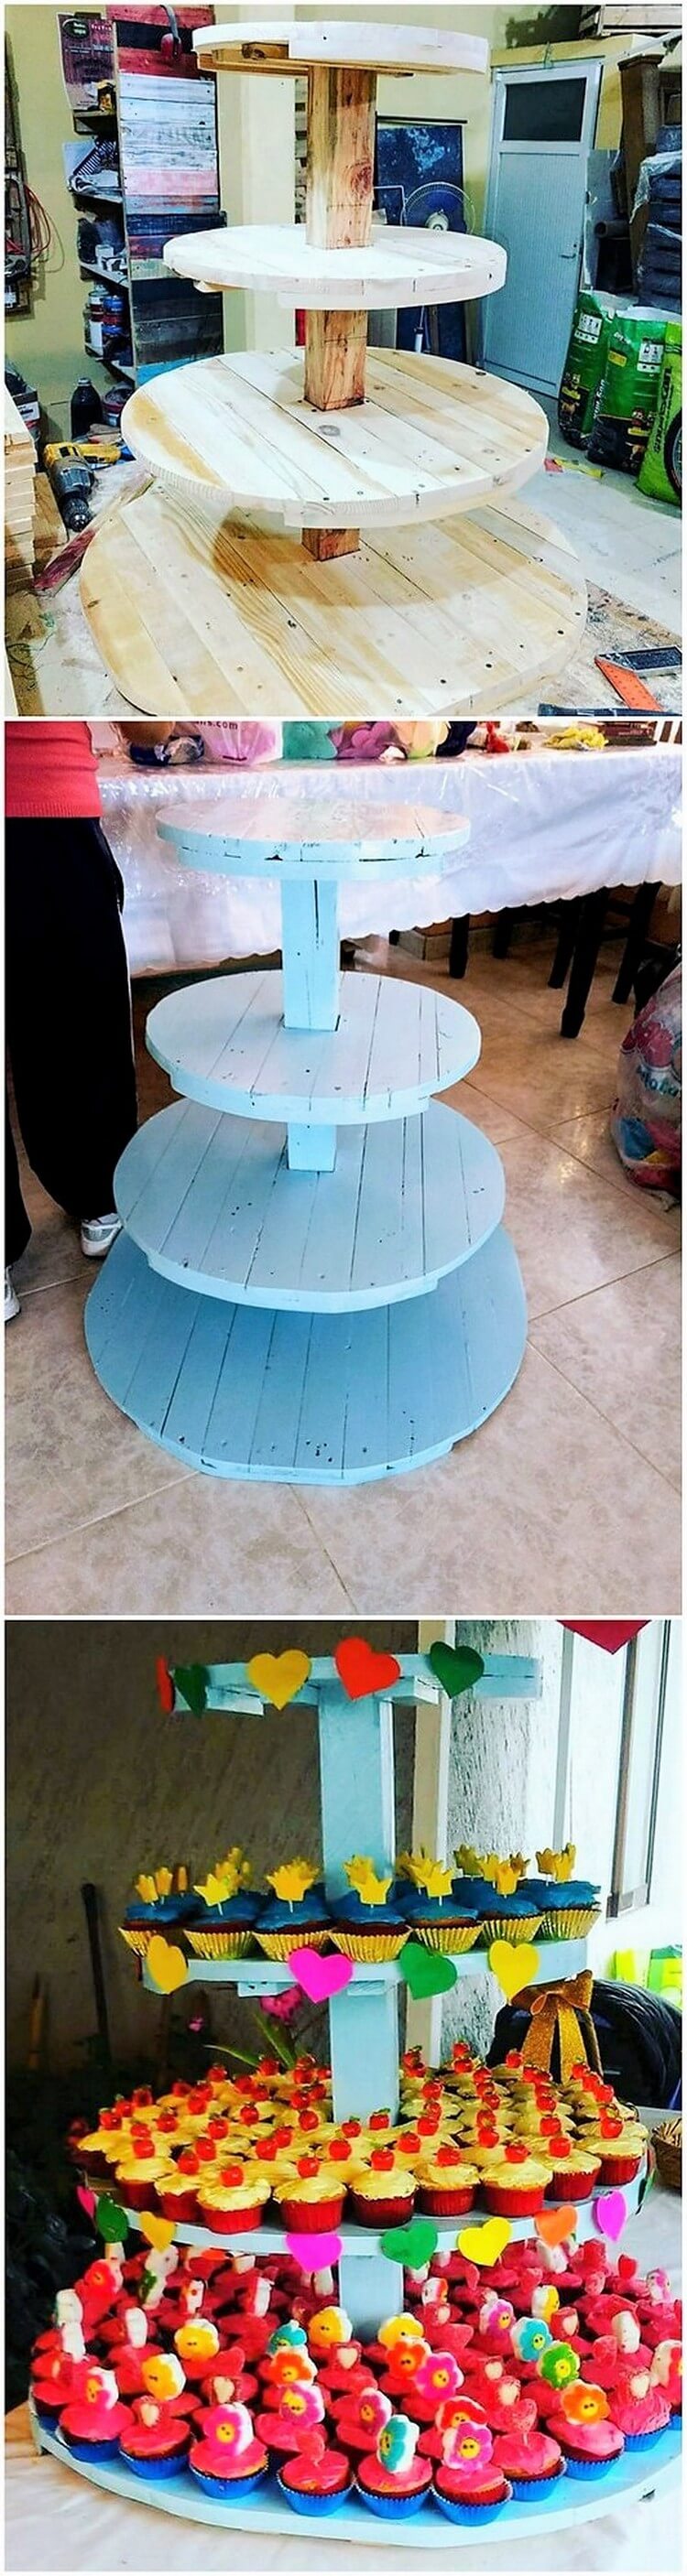 Pallet Table Creation